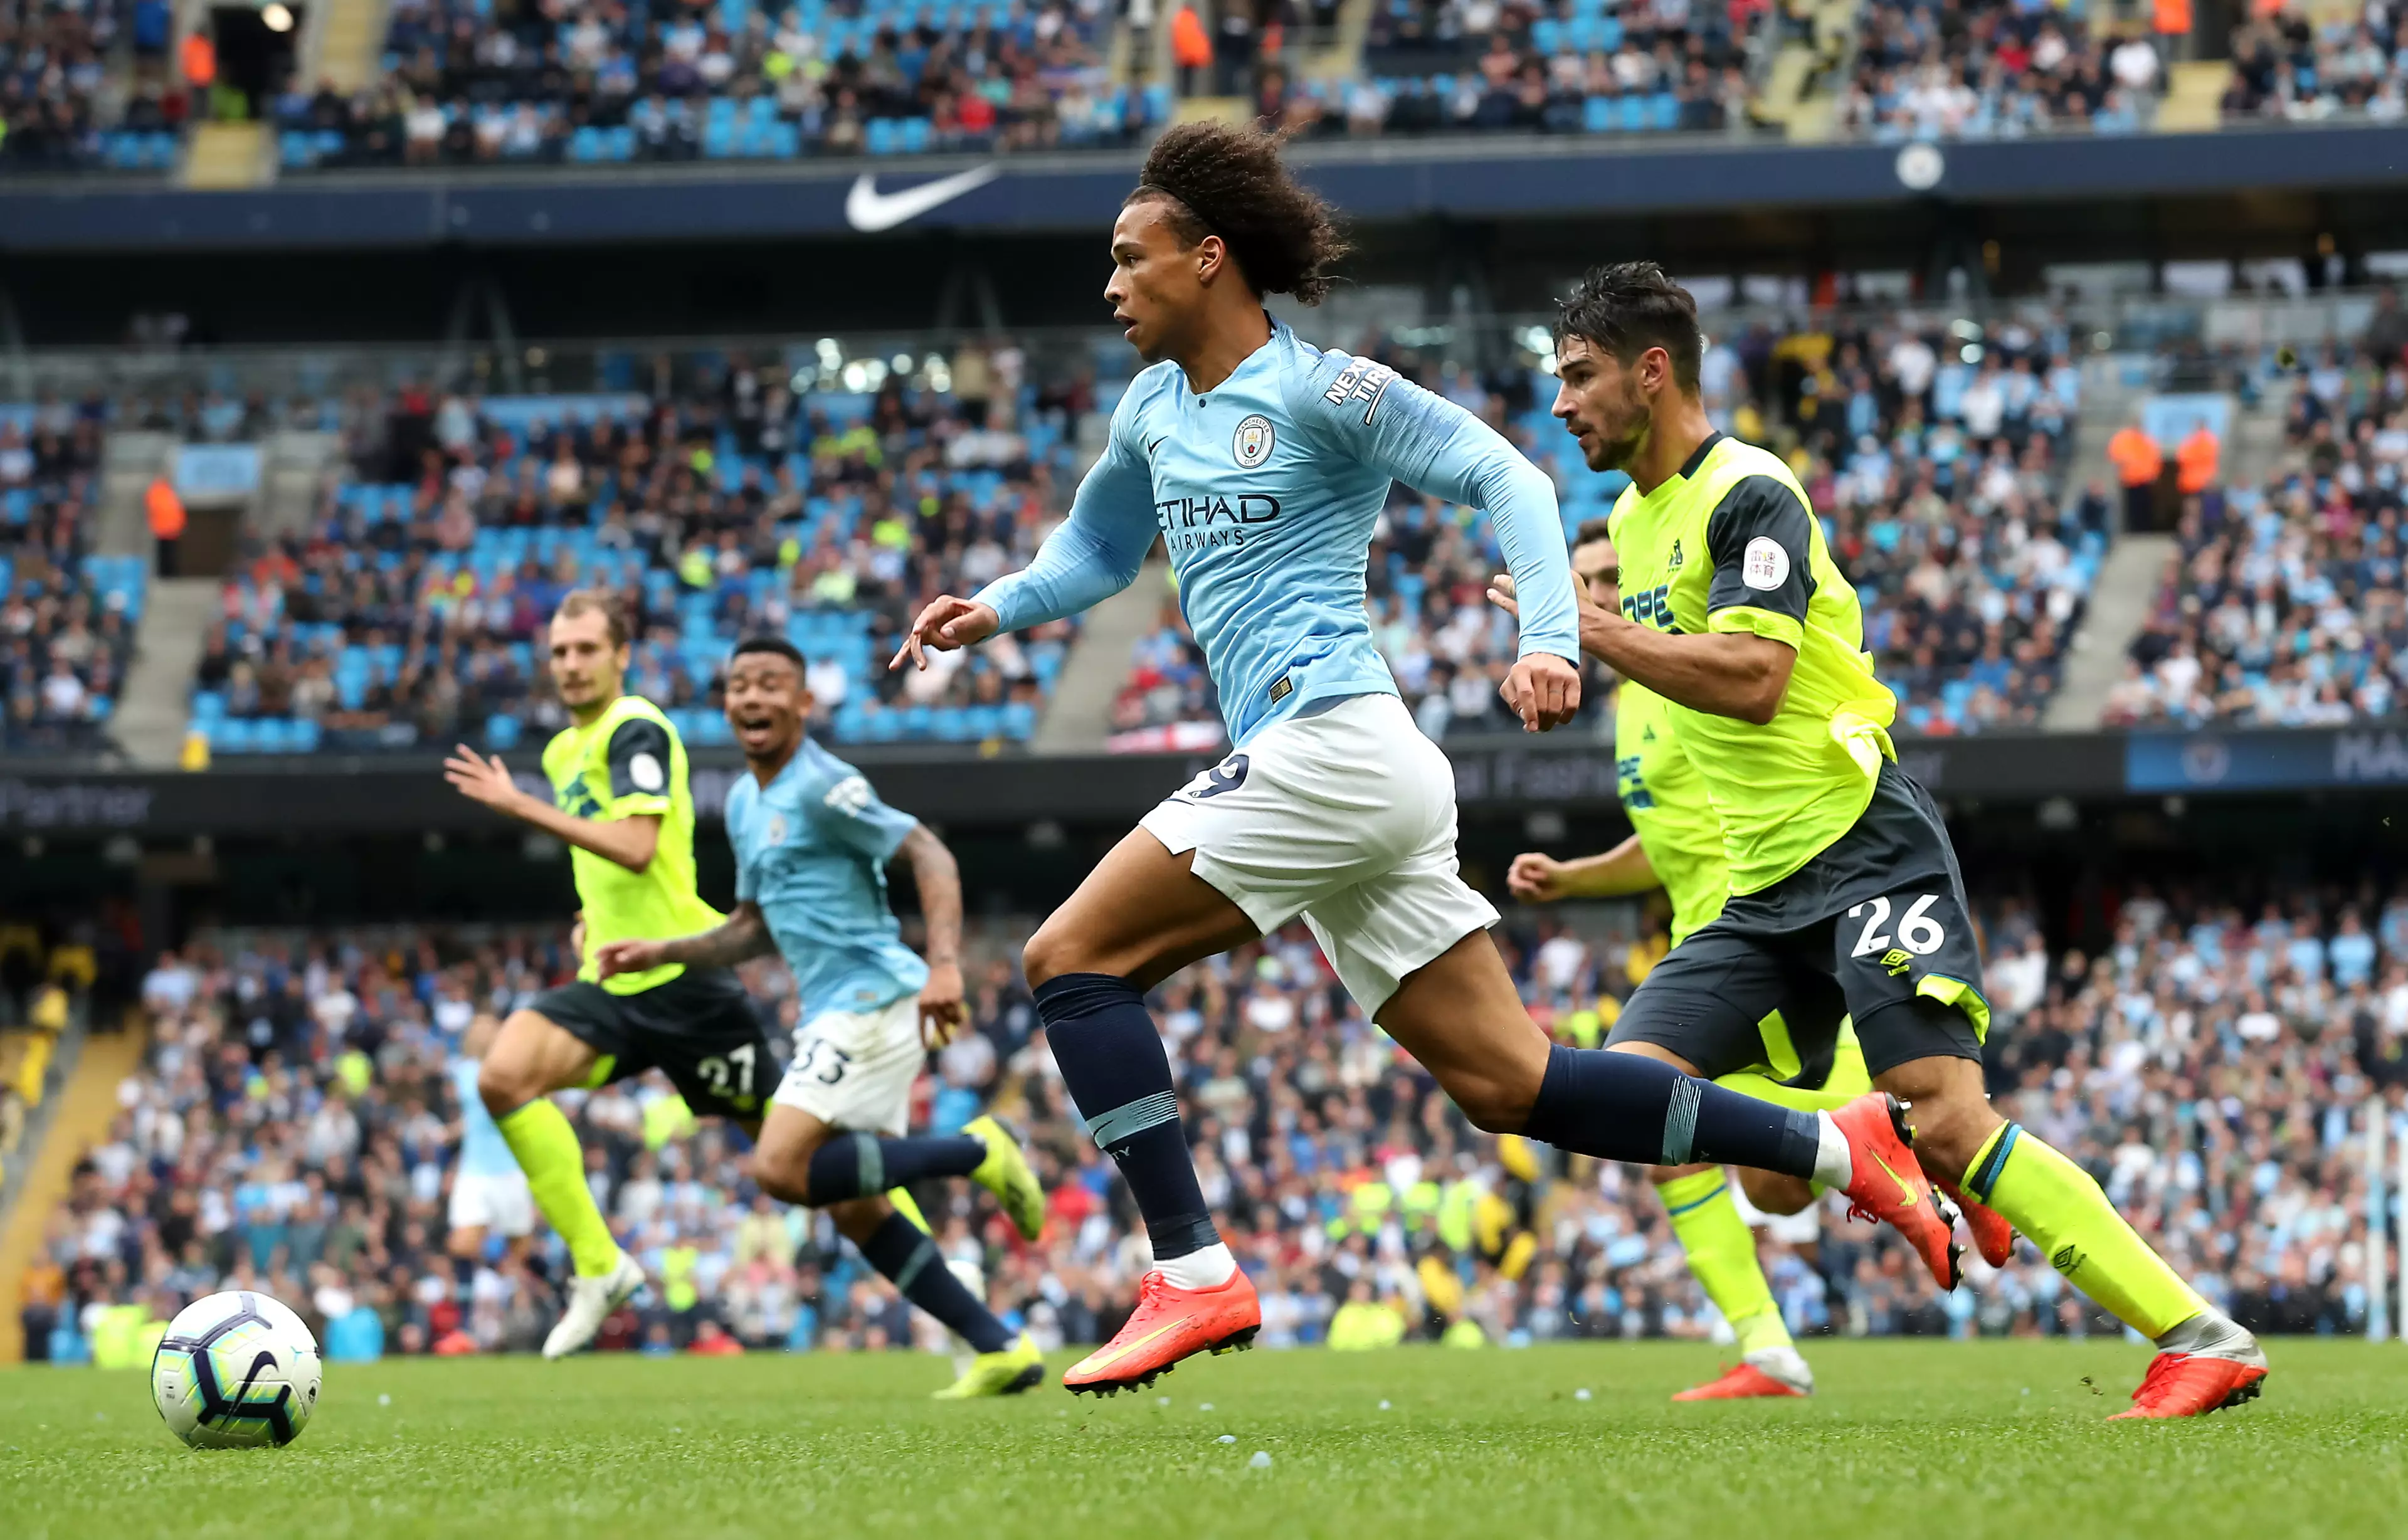 Sane in action for City. Image: PA